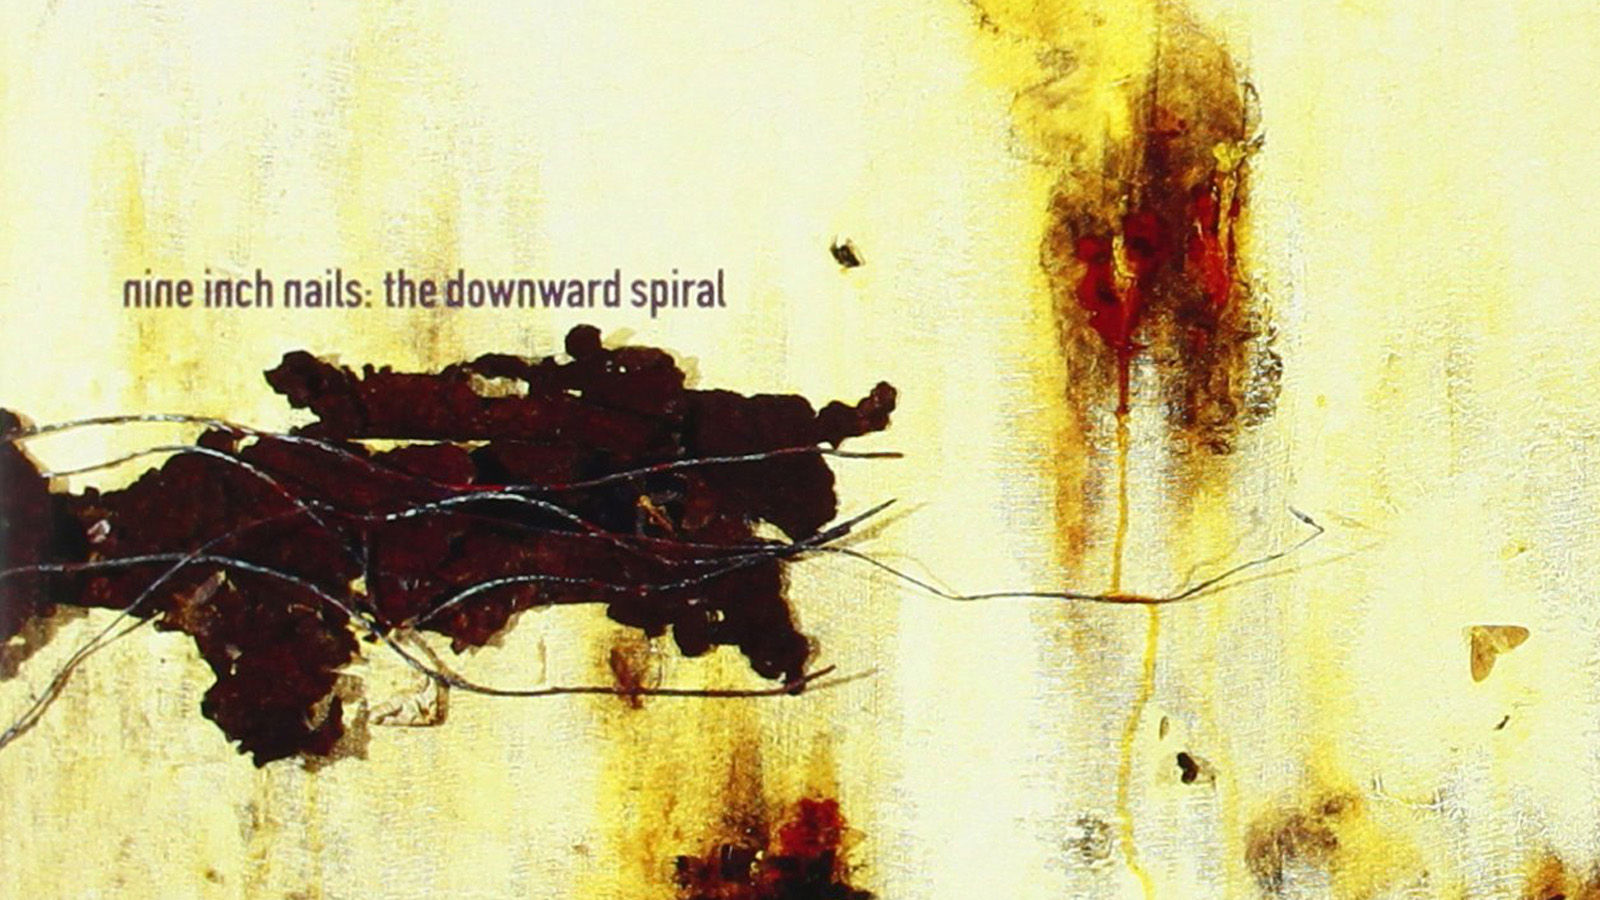 Nine Inch Nails' 'The Downward Spiral': The Story Behind the Cover